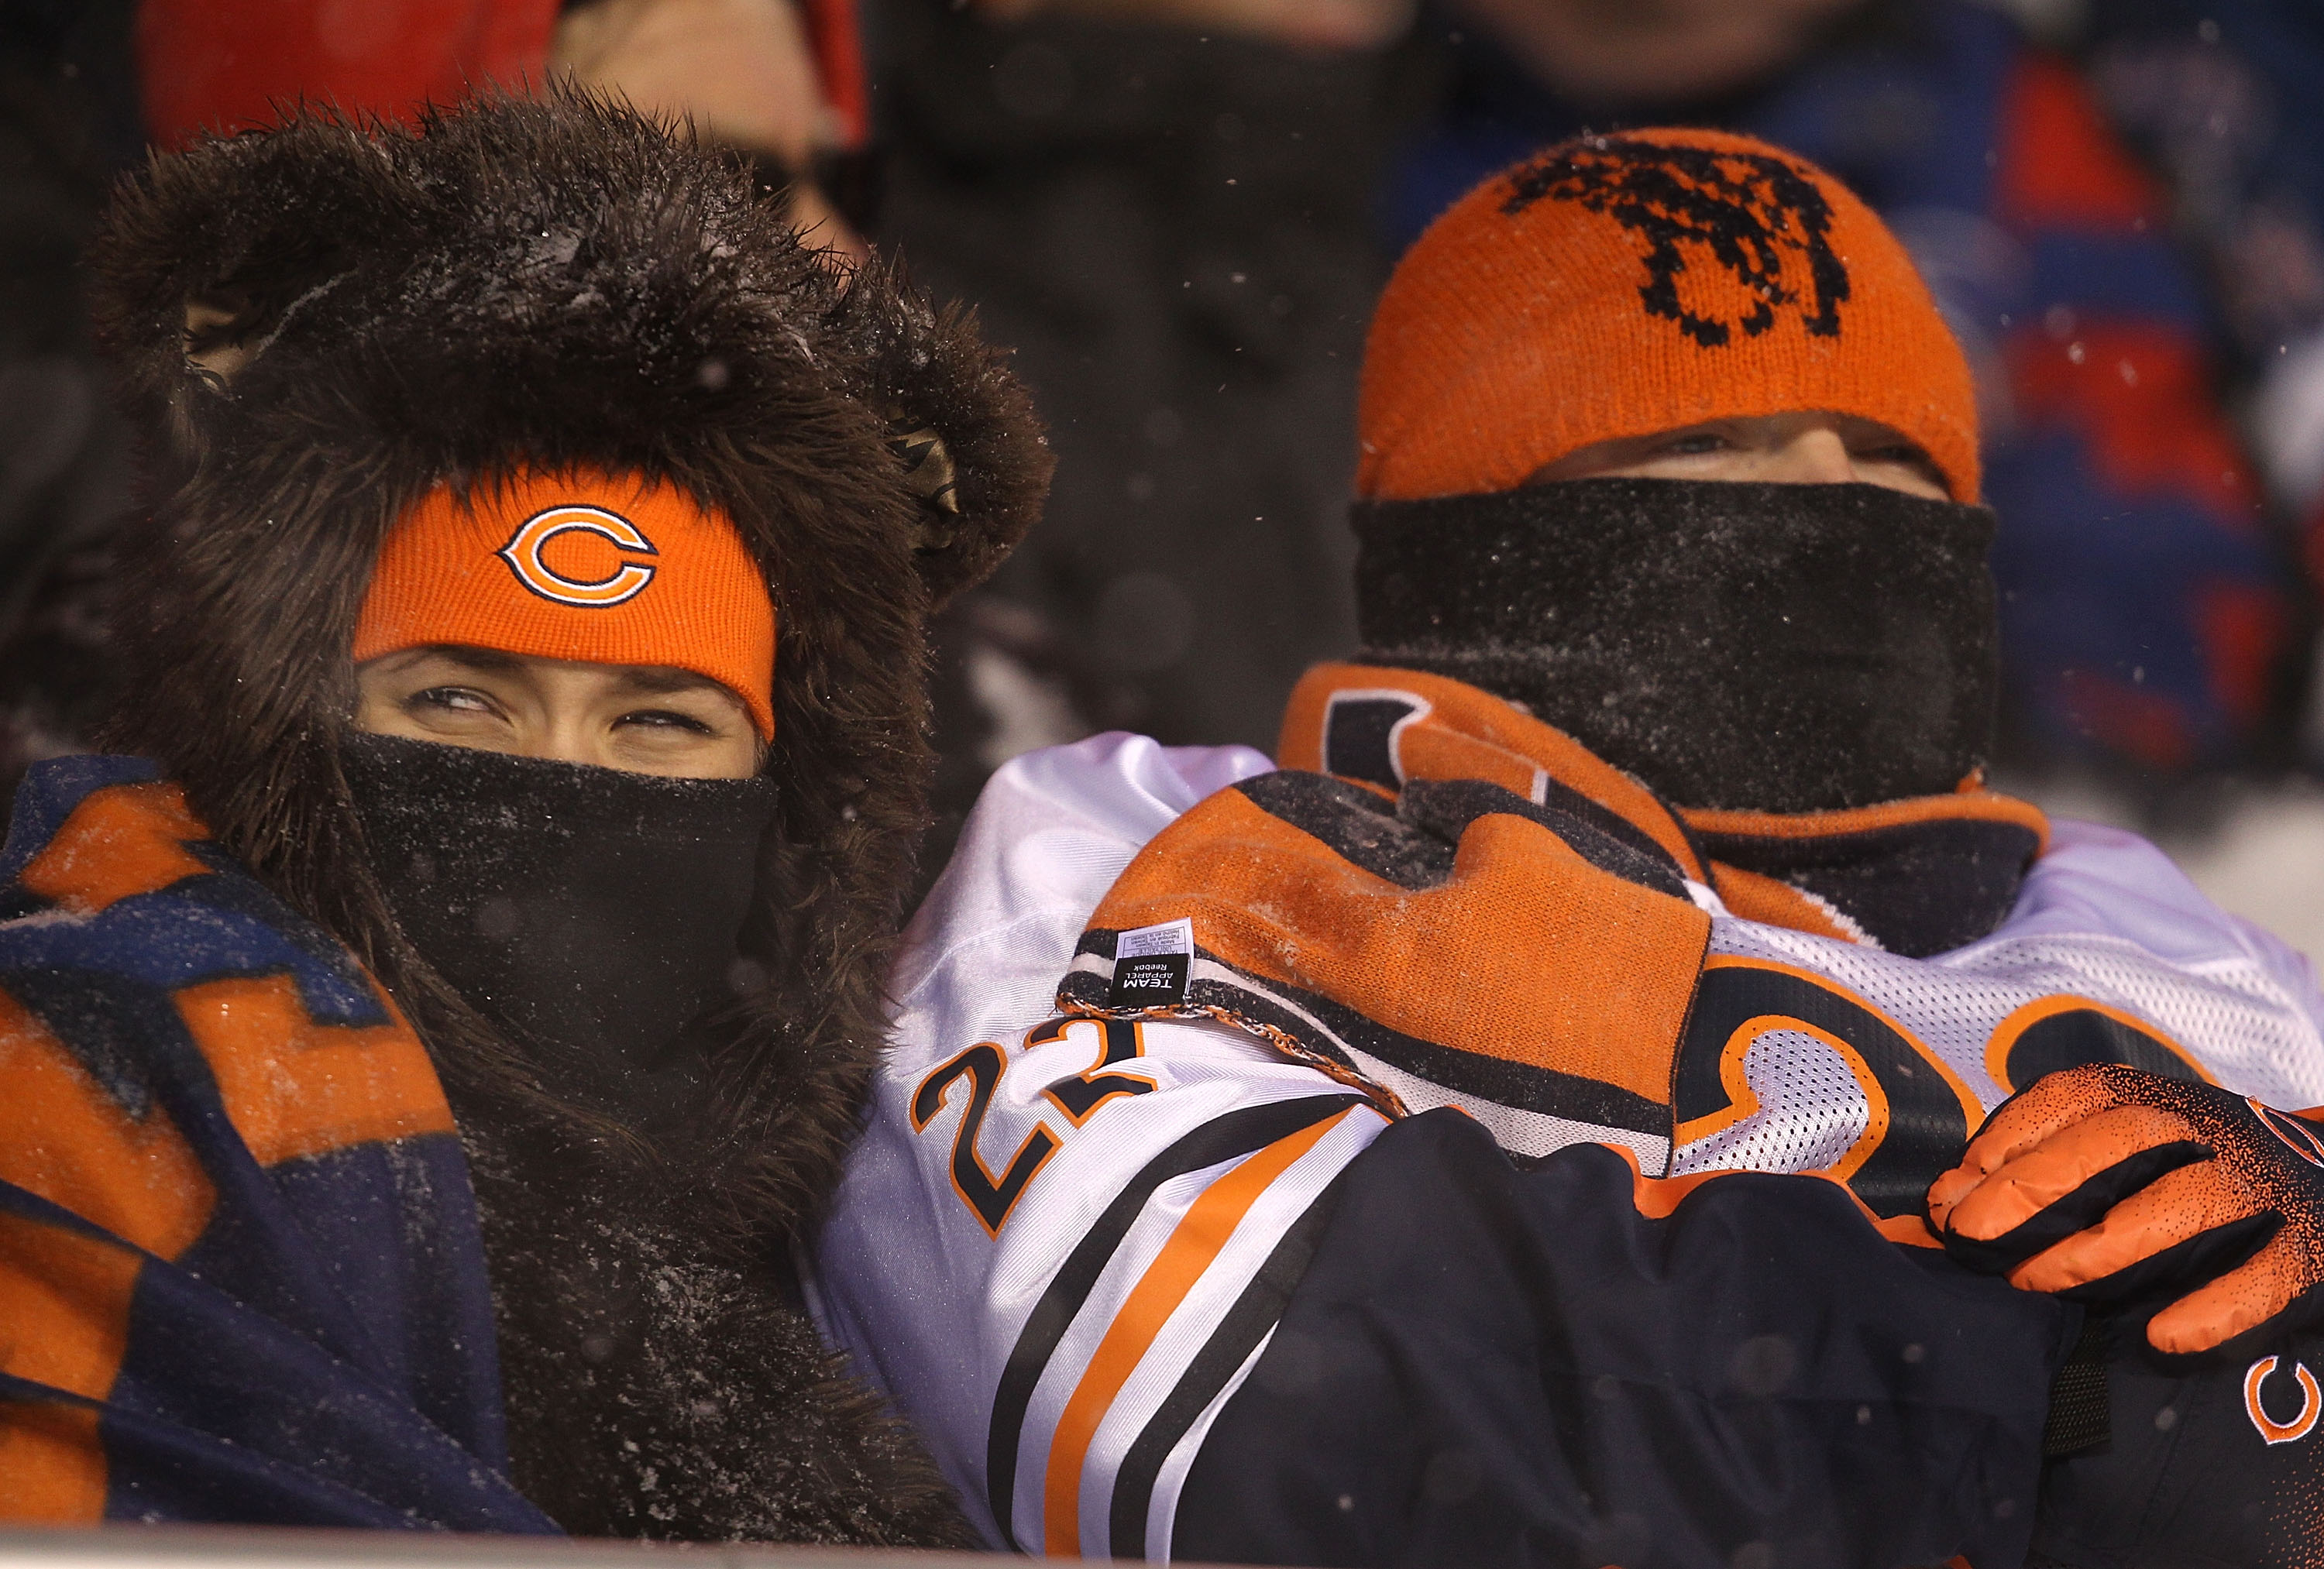 CHICAGO - DECEMBER 12: Fans of the Chicago Bears try to stay warm as they watch the Bears take on the New England Patriots at Soldier Field on December 12, 2010 in Chicago, Illinois. The Patriots defeated the Bears 36-7. (Photo by Jonathan Daniel/Getty Im